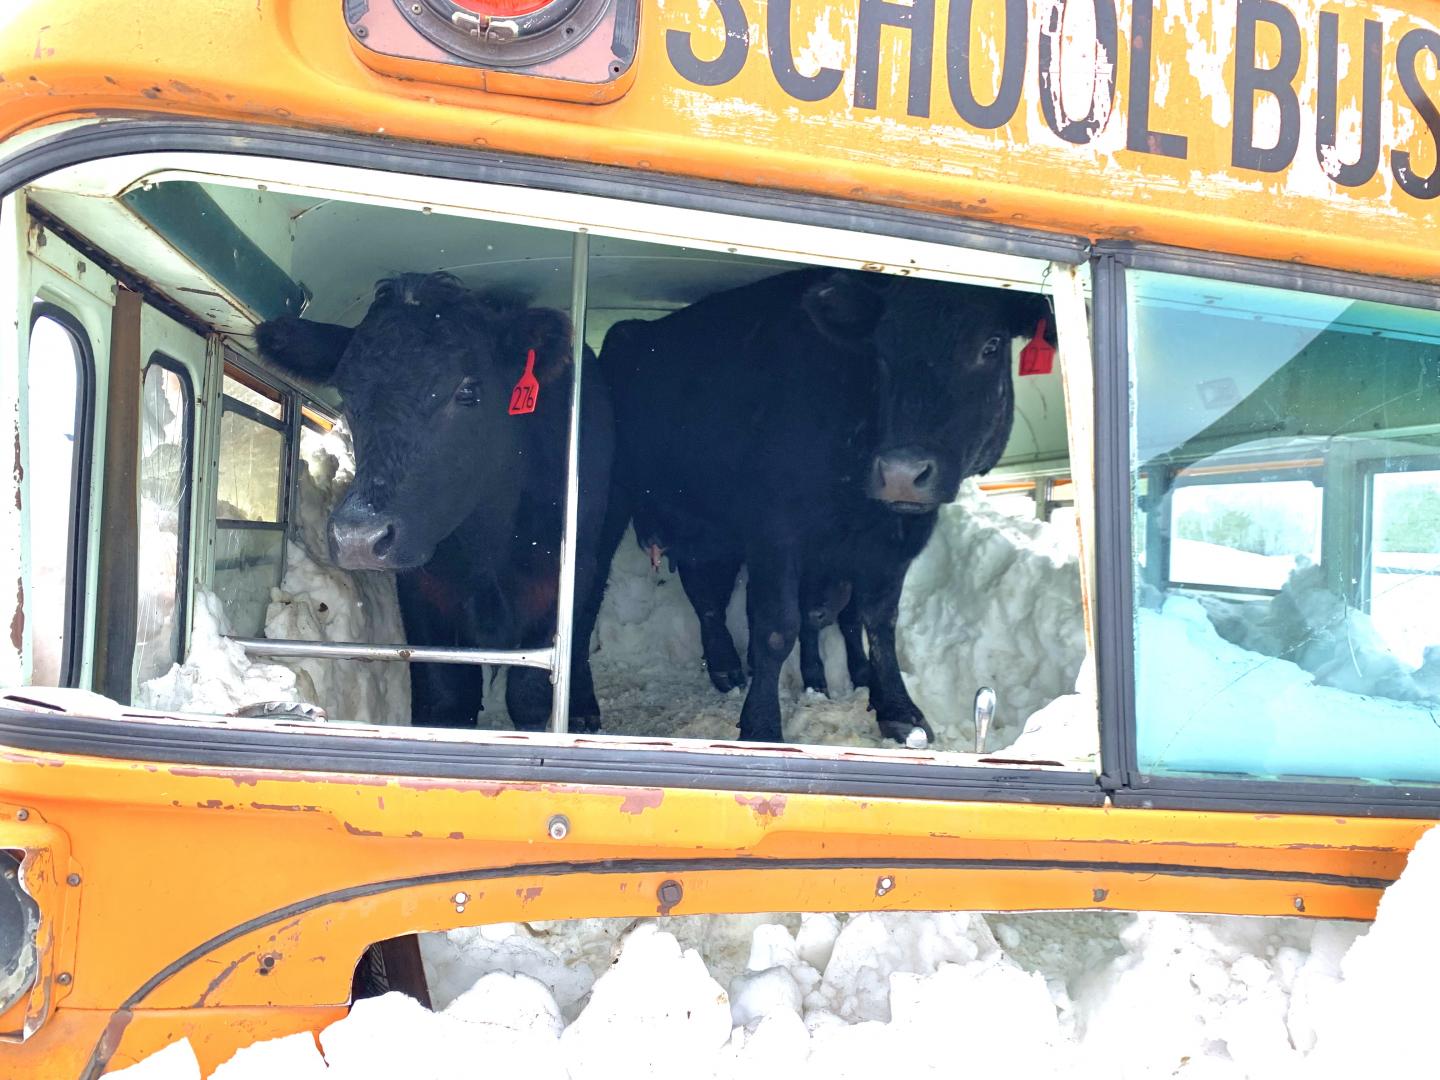 Cows on bus